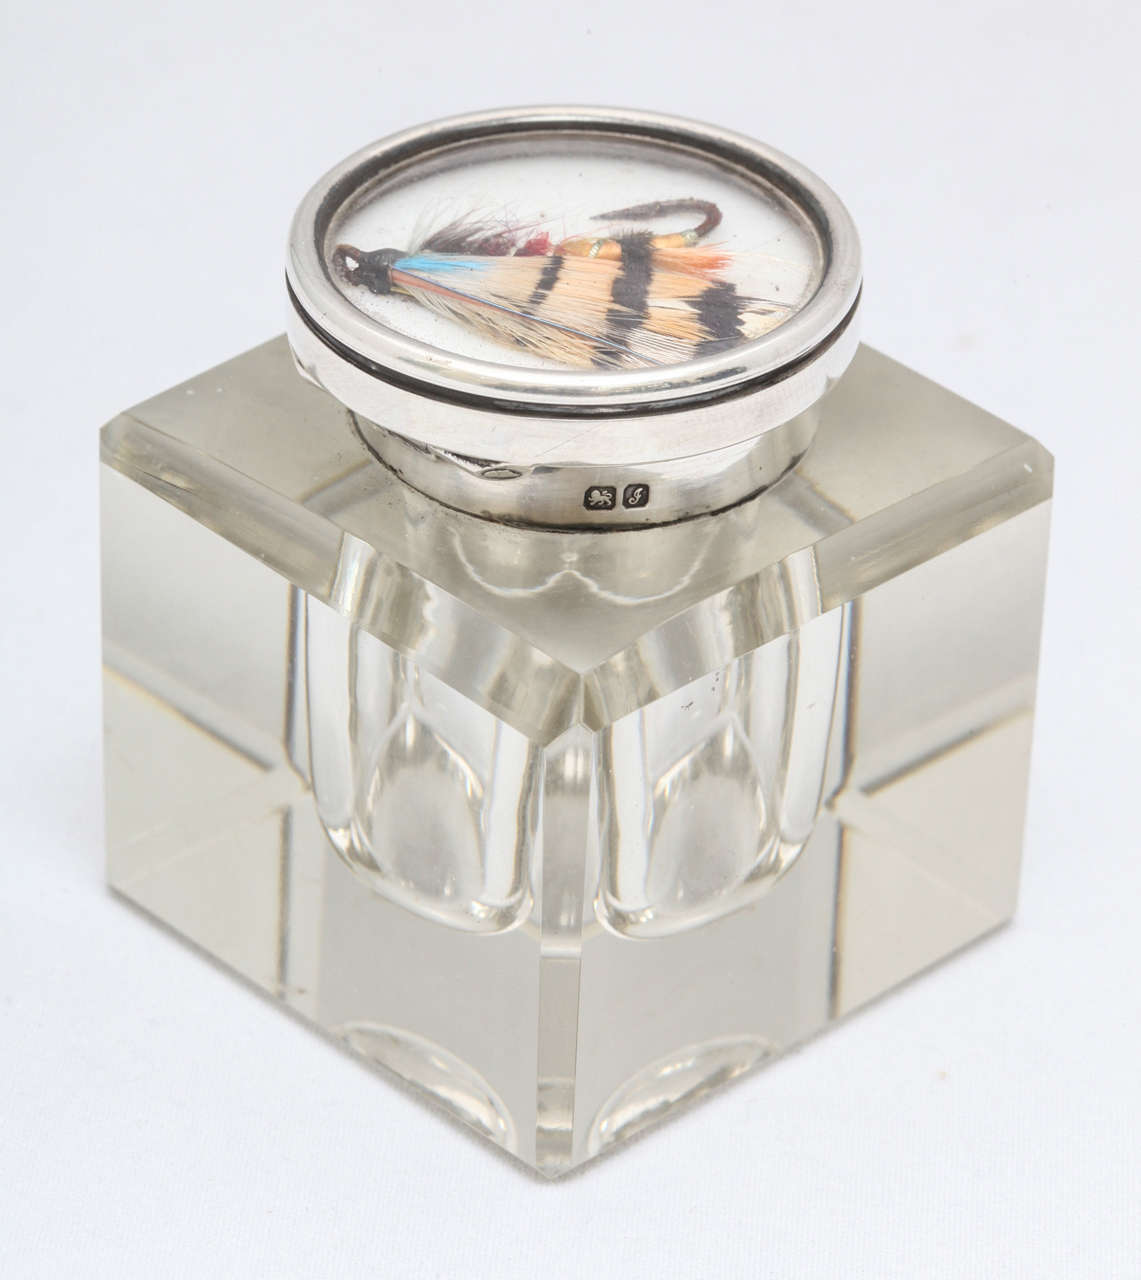 Rare, Edwardian, sterling silver - mounted crystal inkwell, having a hinged lid, Chester, England, 1909. Top of lid has an 